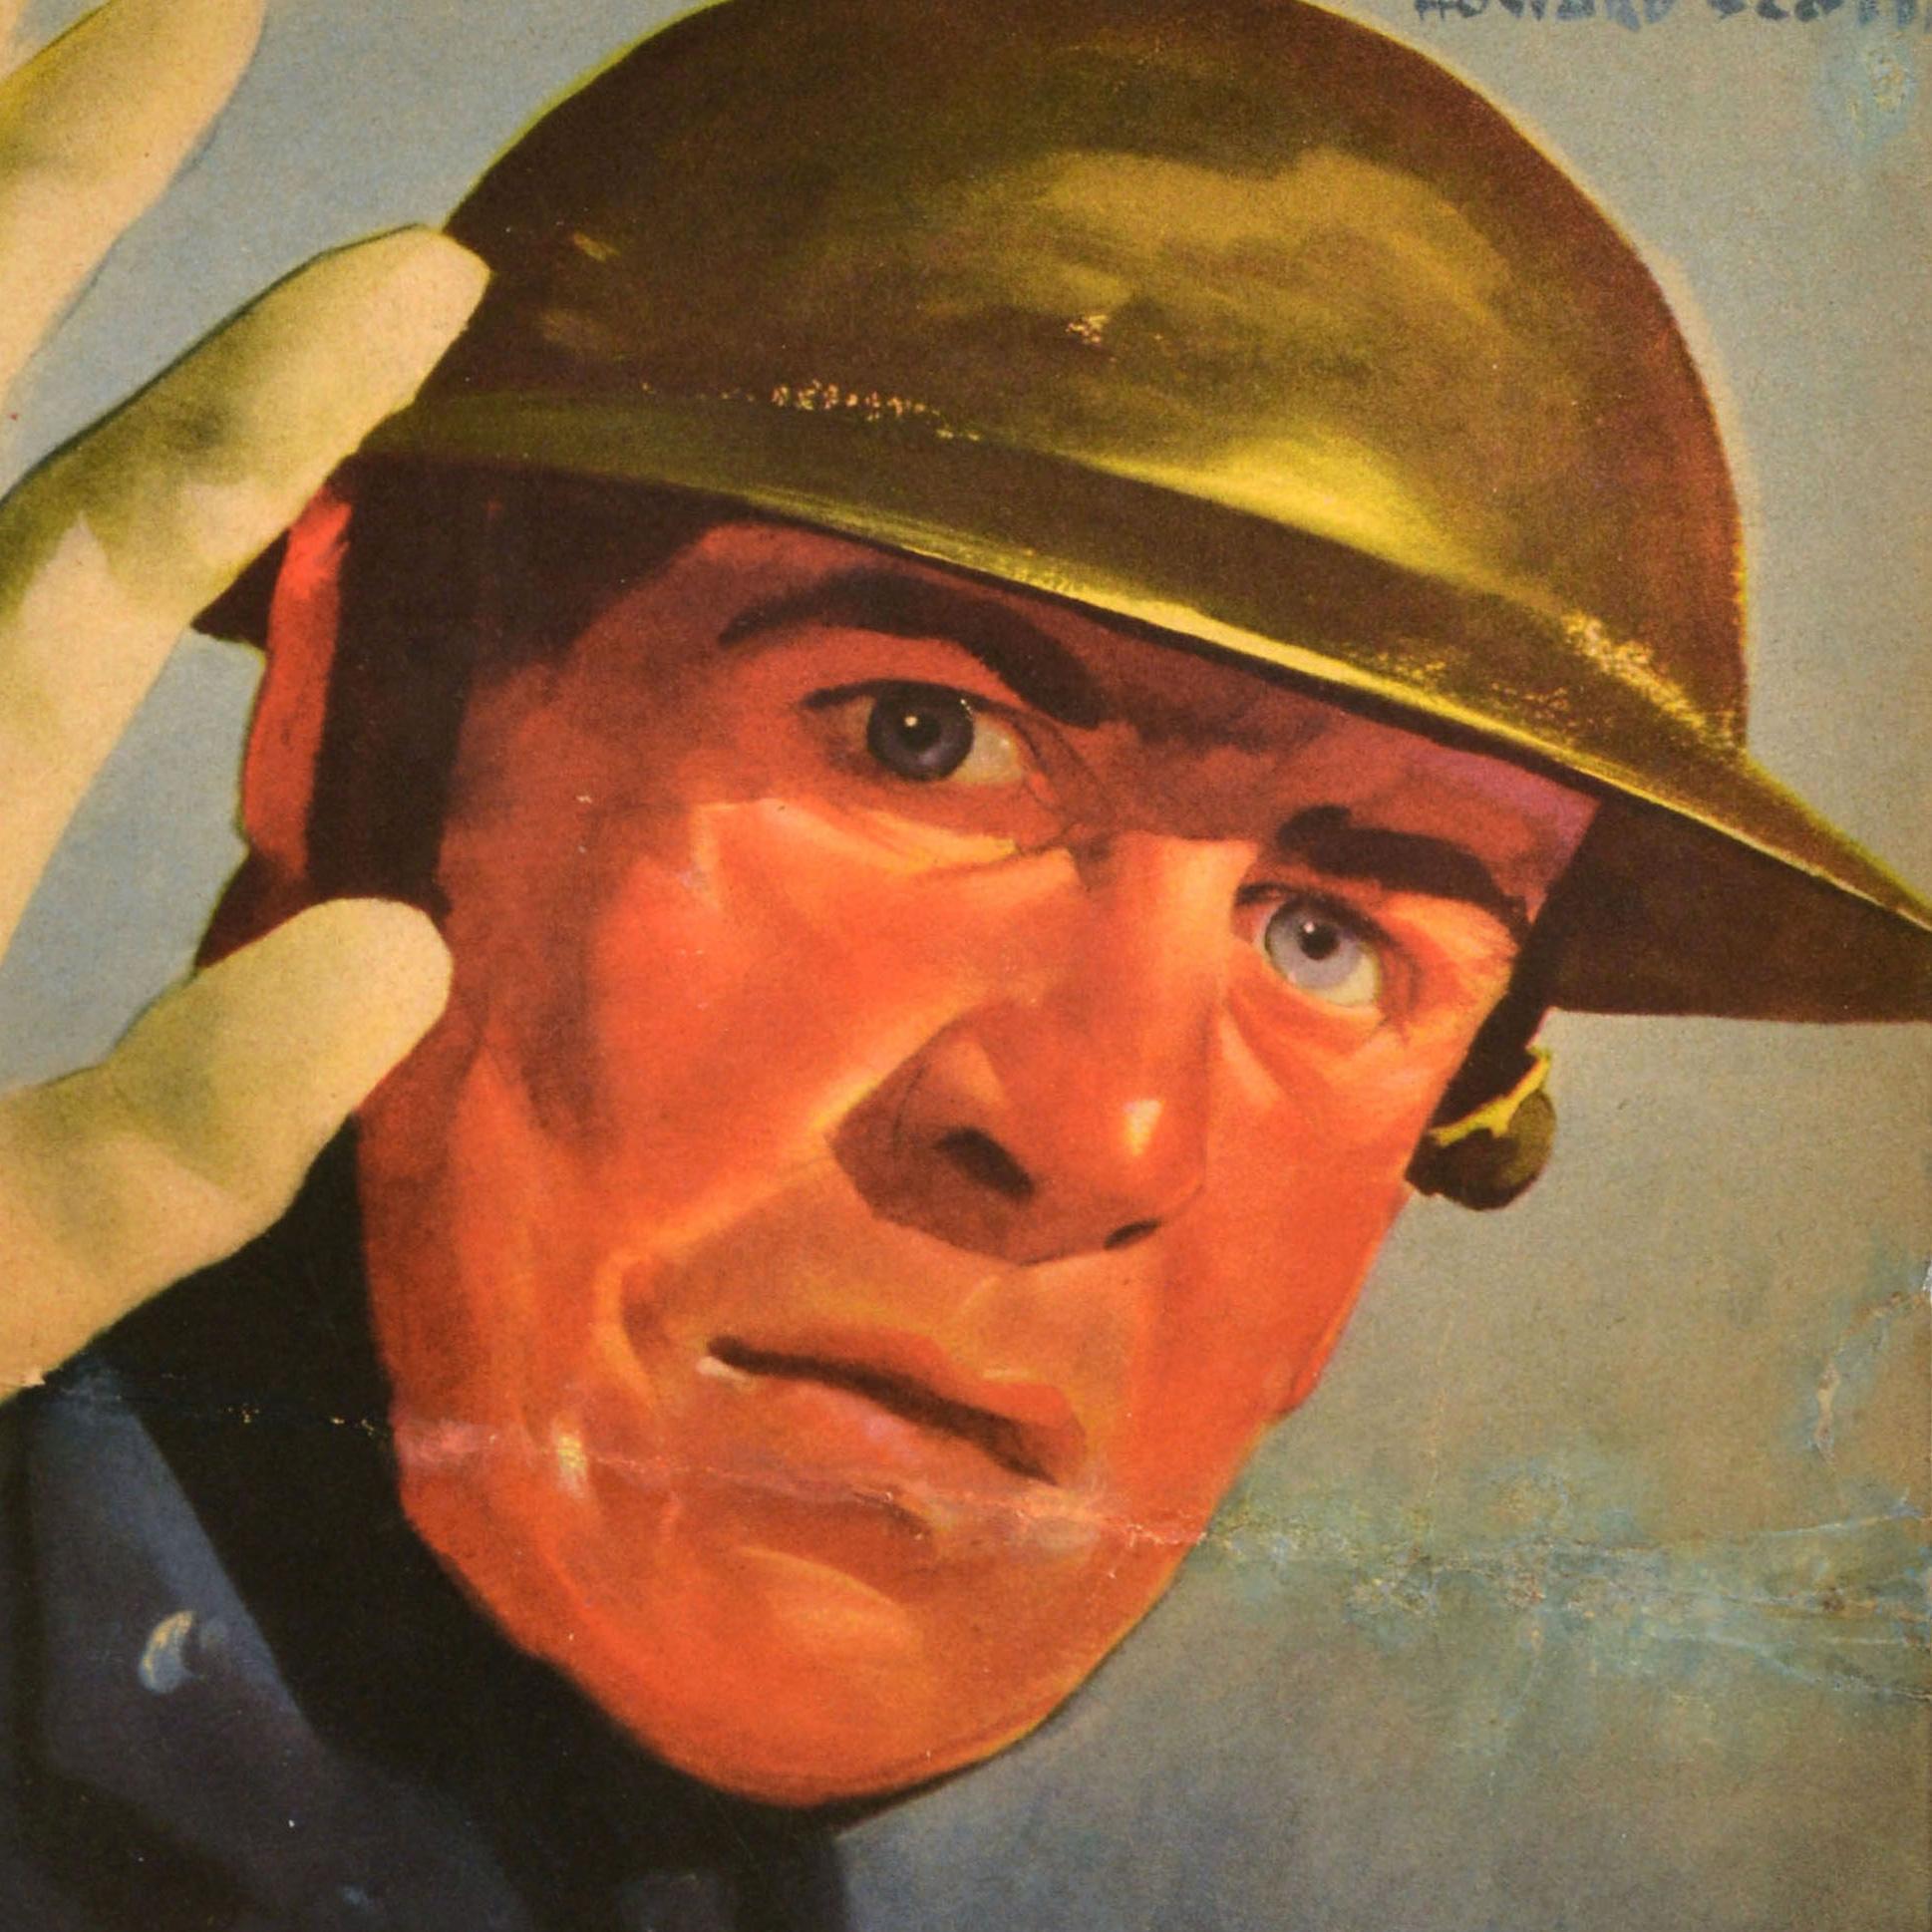 Original vintage World War Two warning poster - Quiet! Stop needless noise Noise wastes energy, dissipates manpower, slows war production - featuring a dynamic image of a man in a helmet looking at the viewer in alarm and raising his gloved hand to